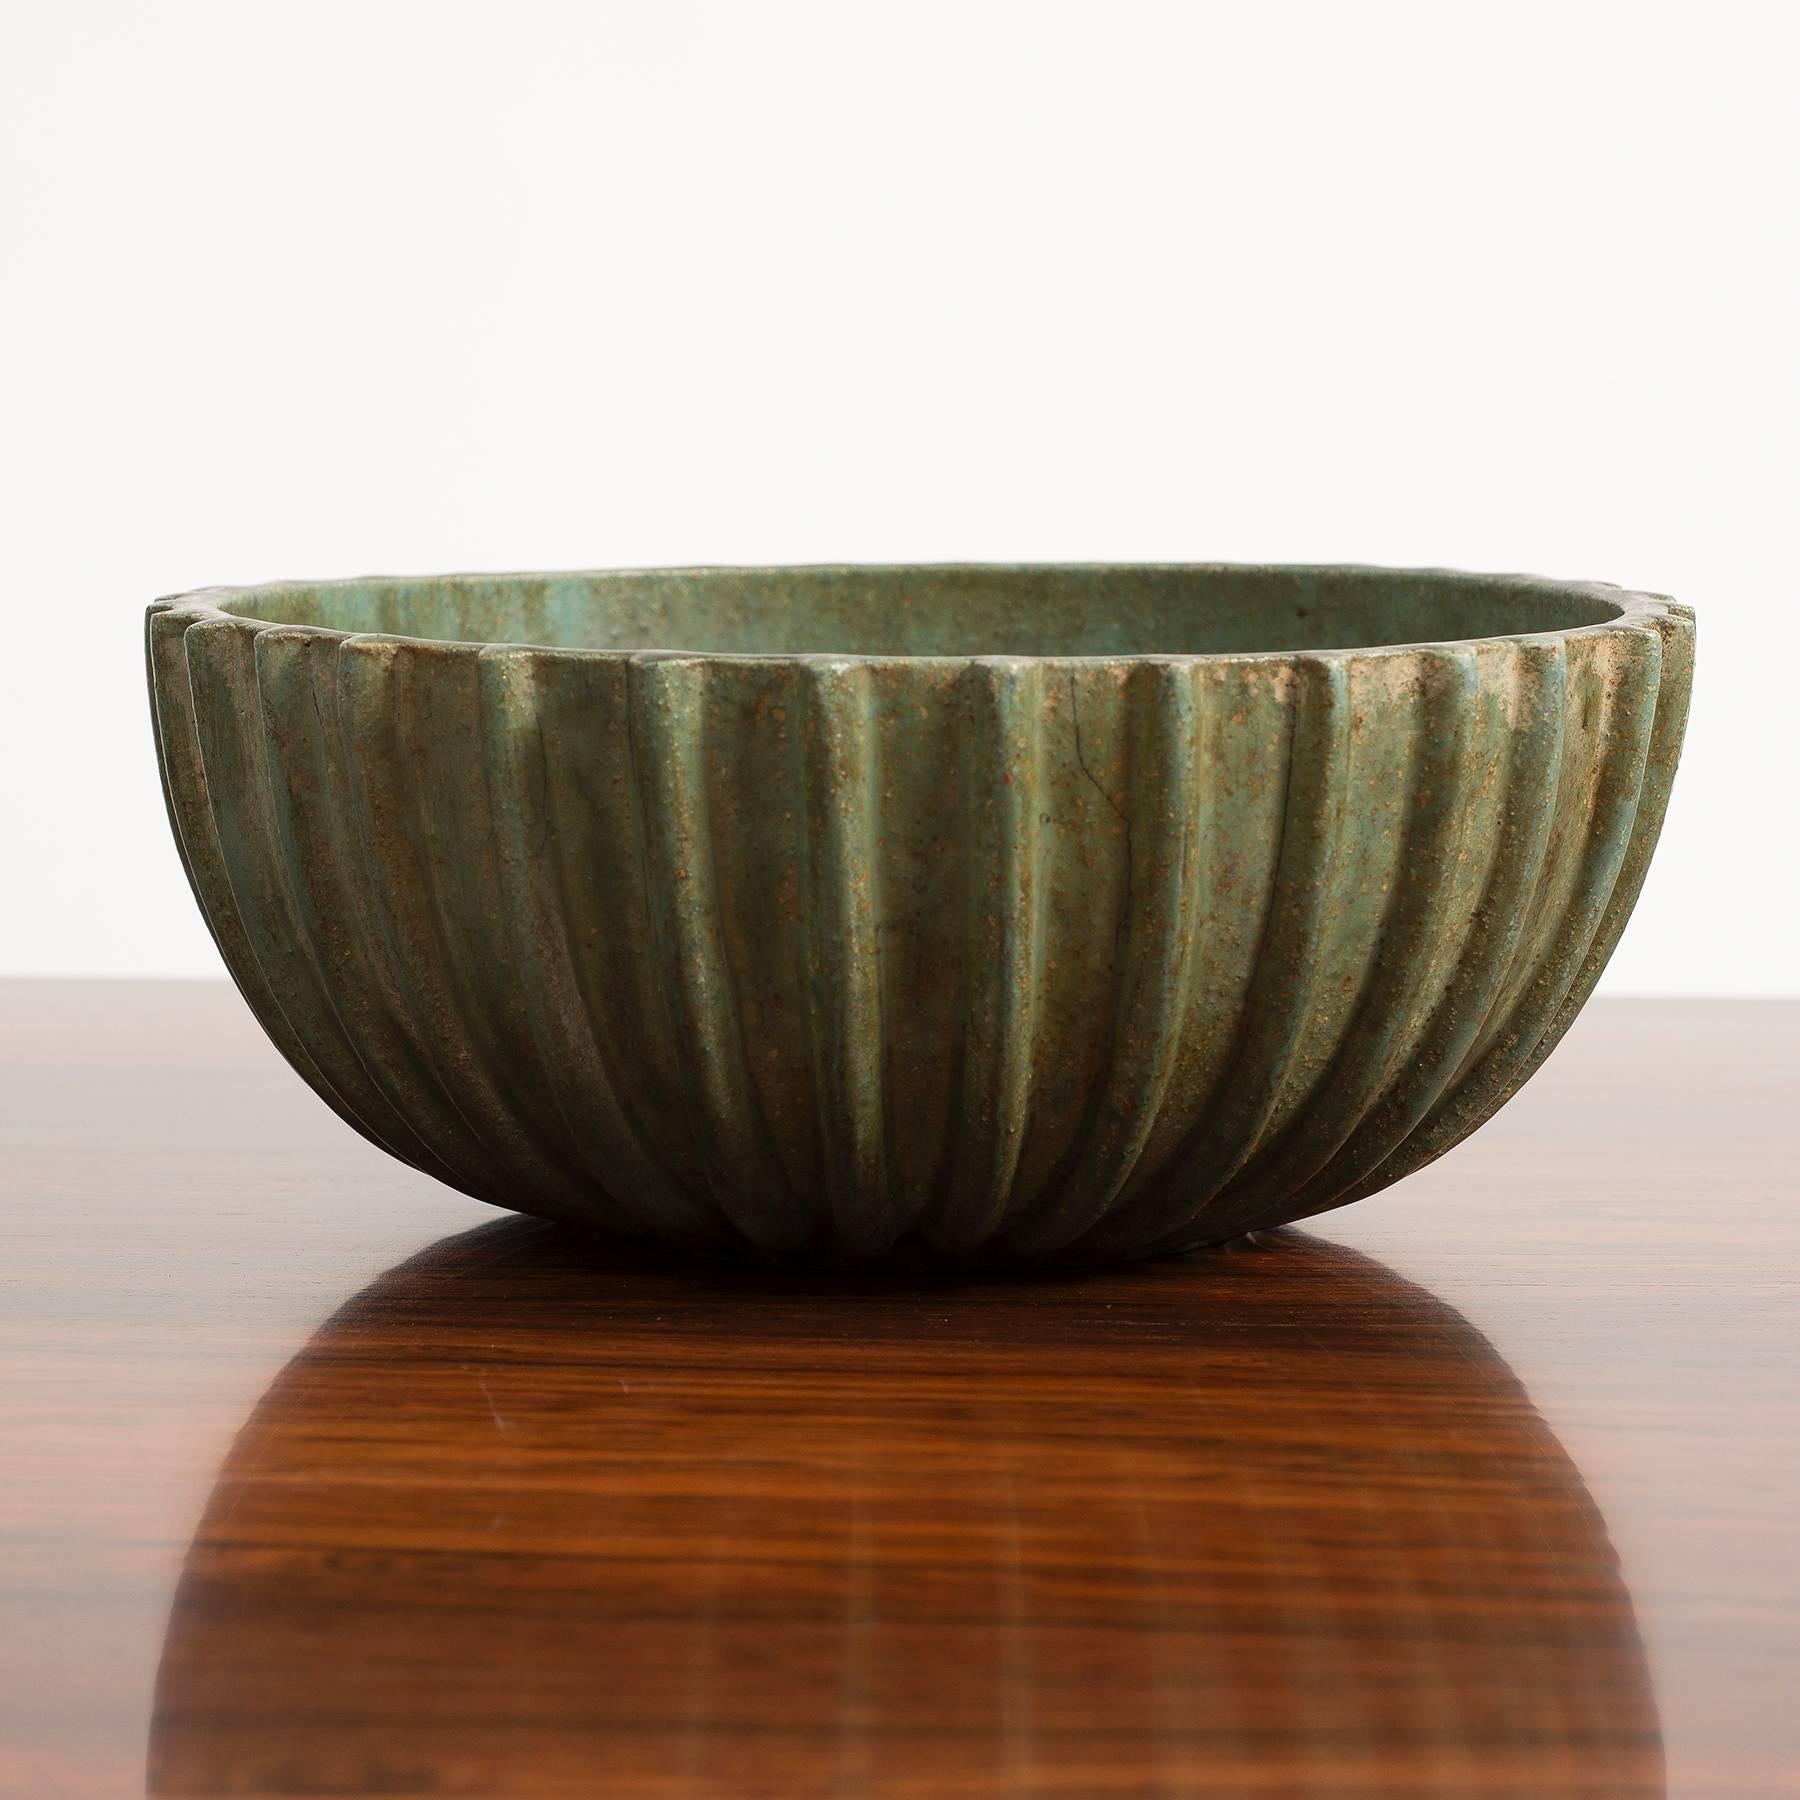 A large ribbed bowl by Arne Bang in green glaze, signed with his 